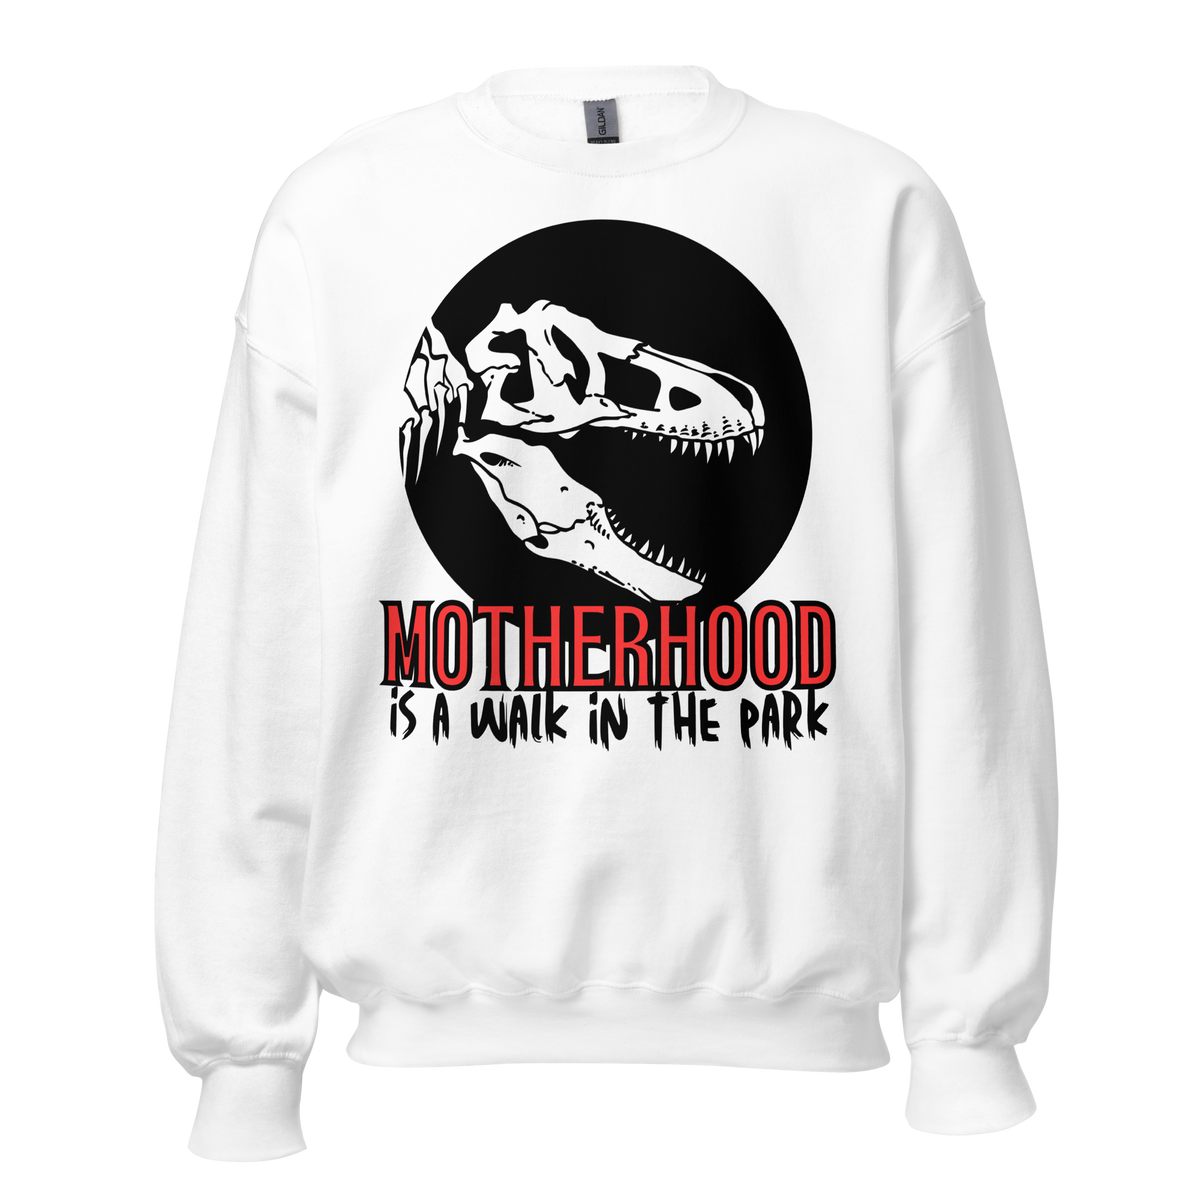 sweatshirt, dinosaur, motherhood, parenting, family, mom life, cozy wear, humorous design, mother's day, mom gift, soft fabric, light-hearted phrase, casual style, warmth, versatile, comfort, strength, adventure, mom pride, laughter, fashion, quality, durability, motherhood its a walk in the park tee